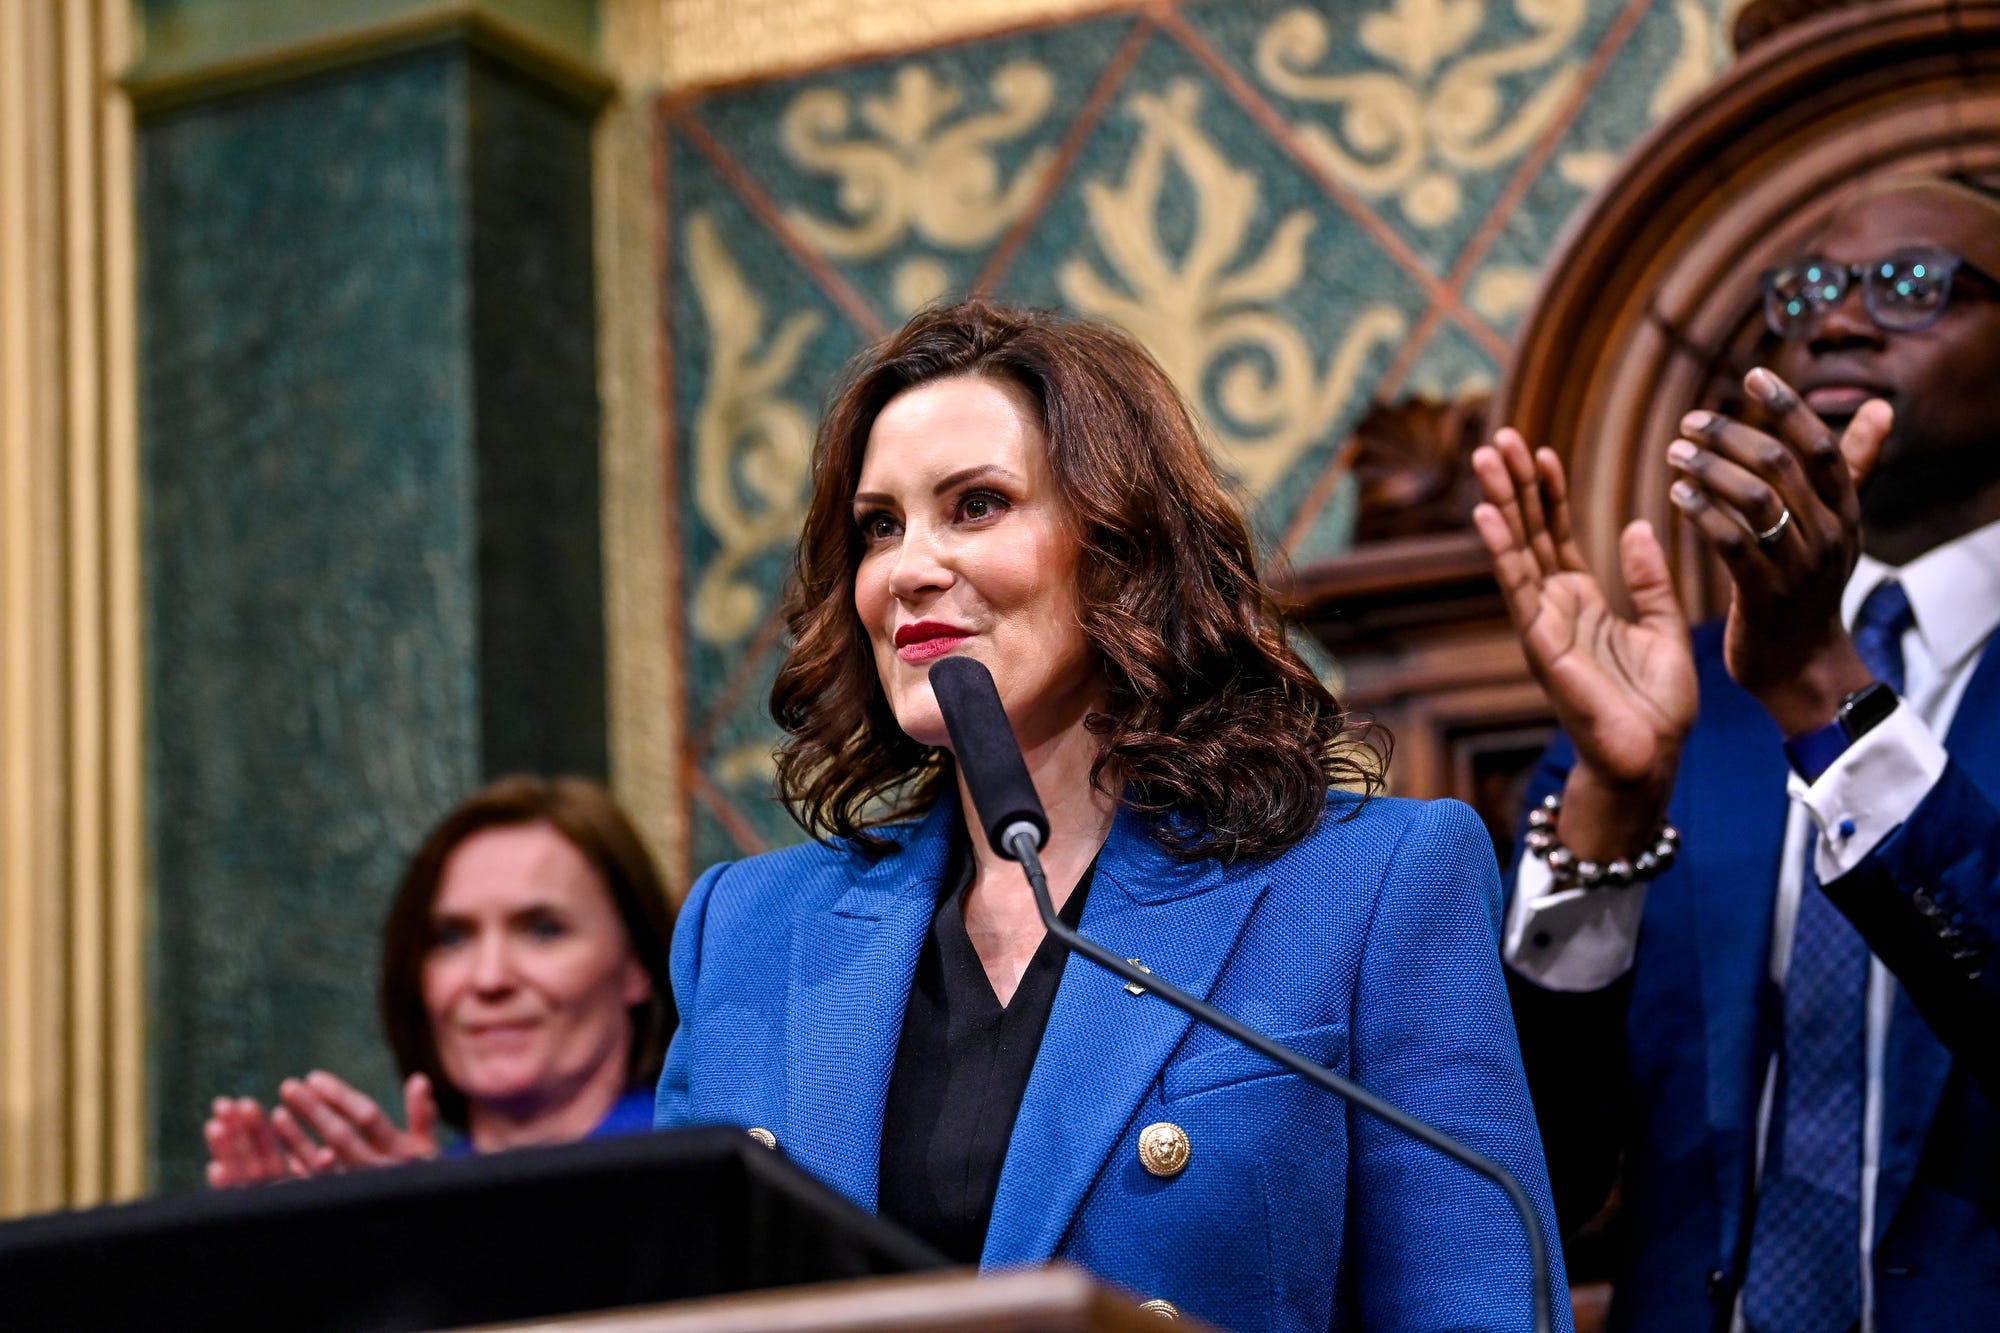 Gov. Whitmer, Democratic leaders want to send 'inflation relief' checks to all taxpayers